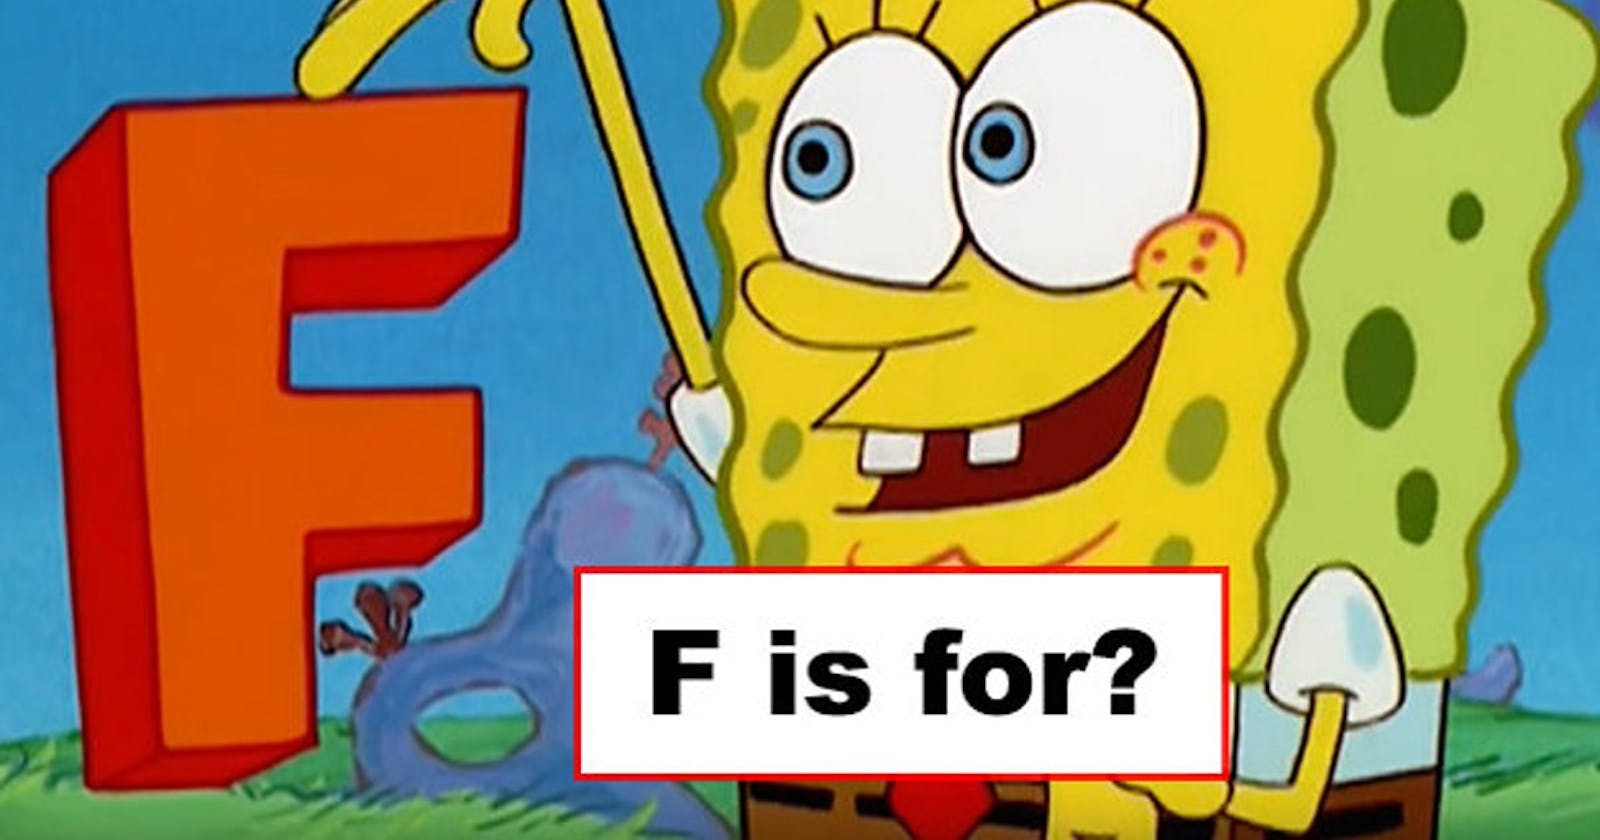 F is For Function?